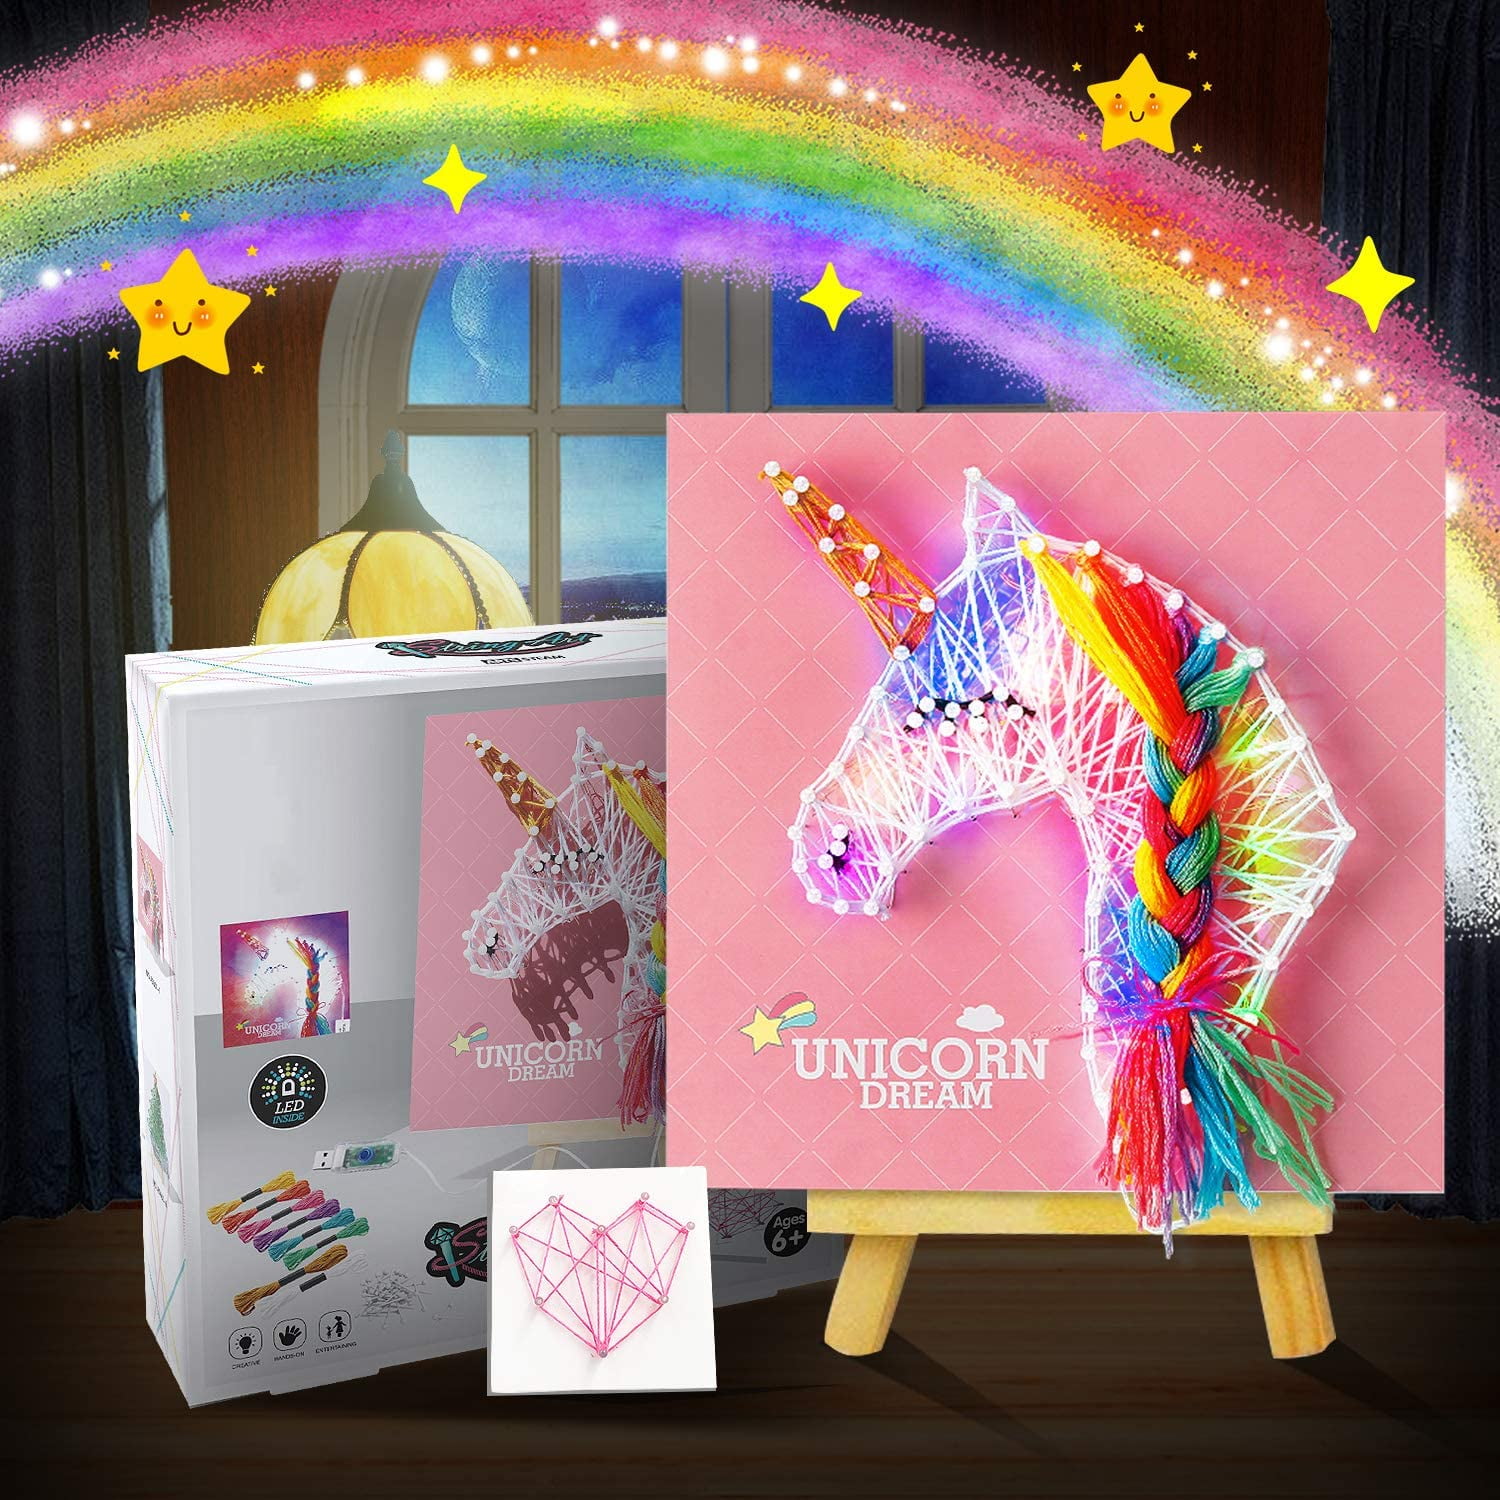 Dan&Darci Unicorn Soap Making Kit - Girls Crafts DIY Project Age 6+ Year Old Kids Girl Gifts Science Stem Activity Teenage Christmas Gift Make Your